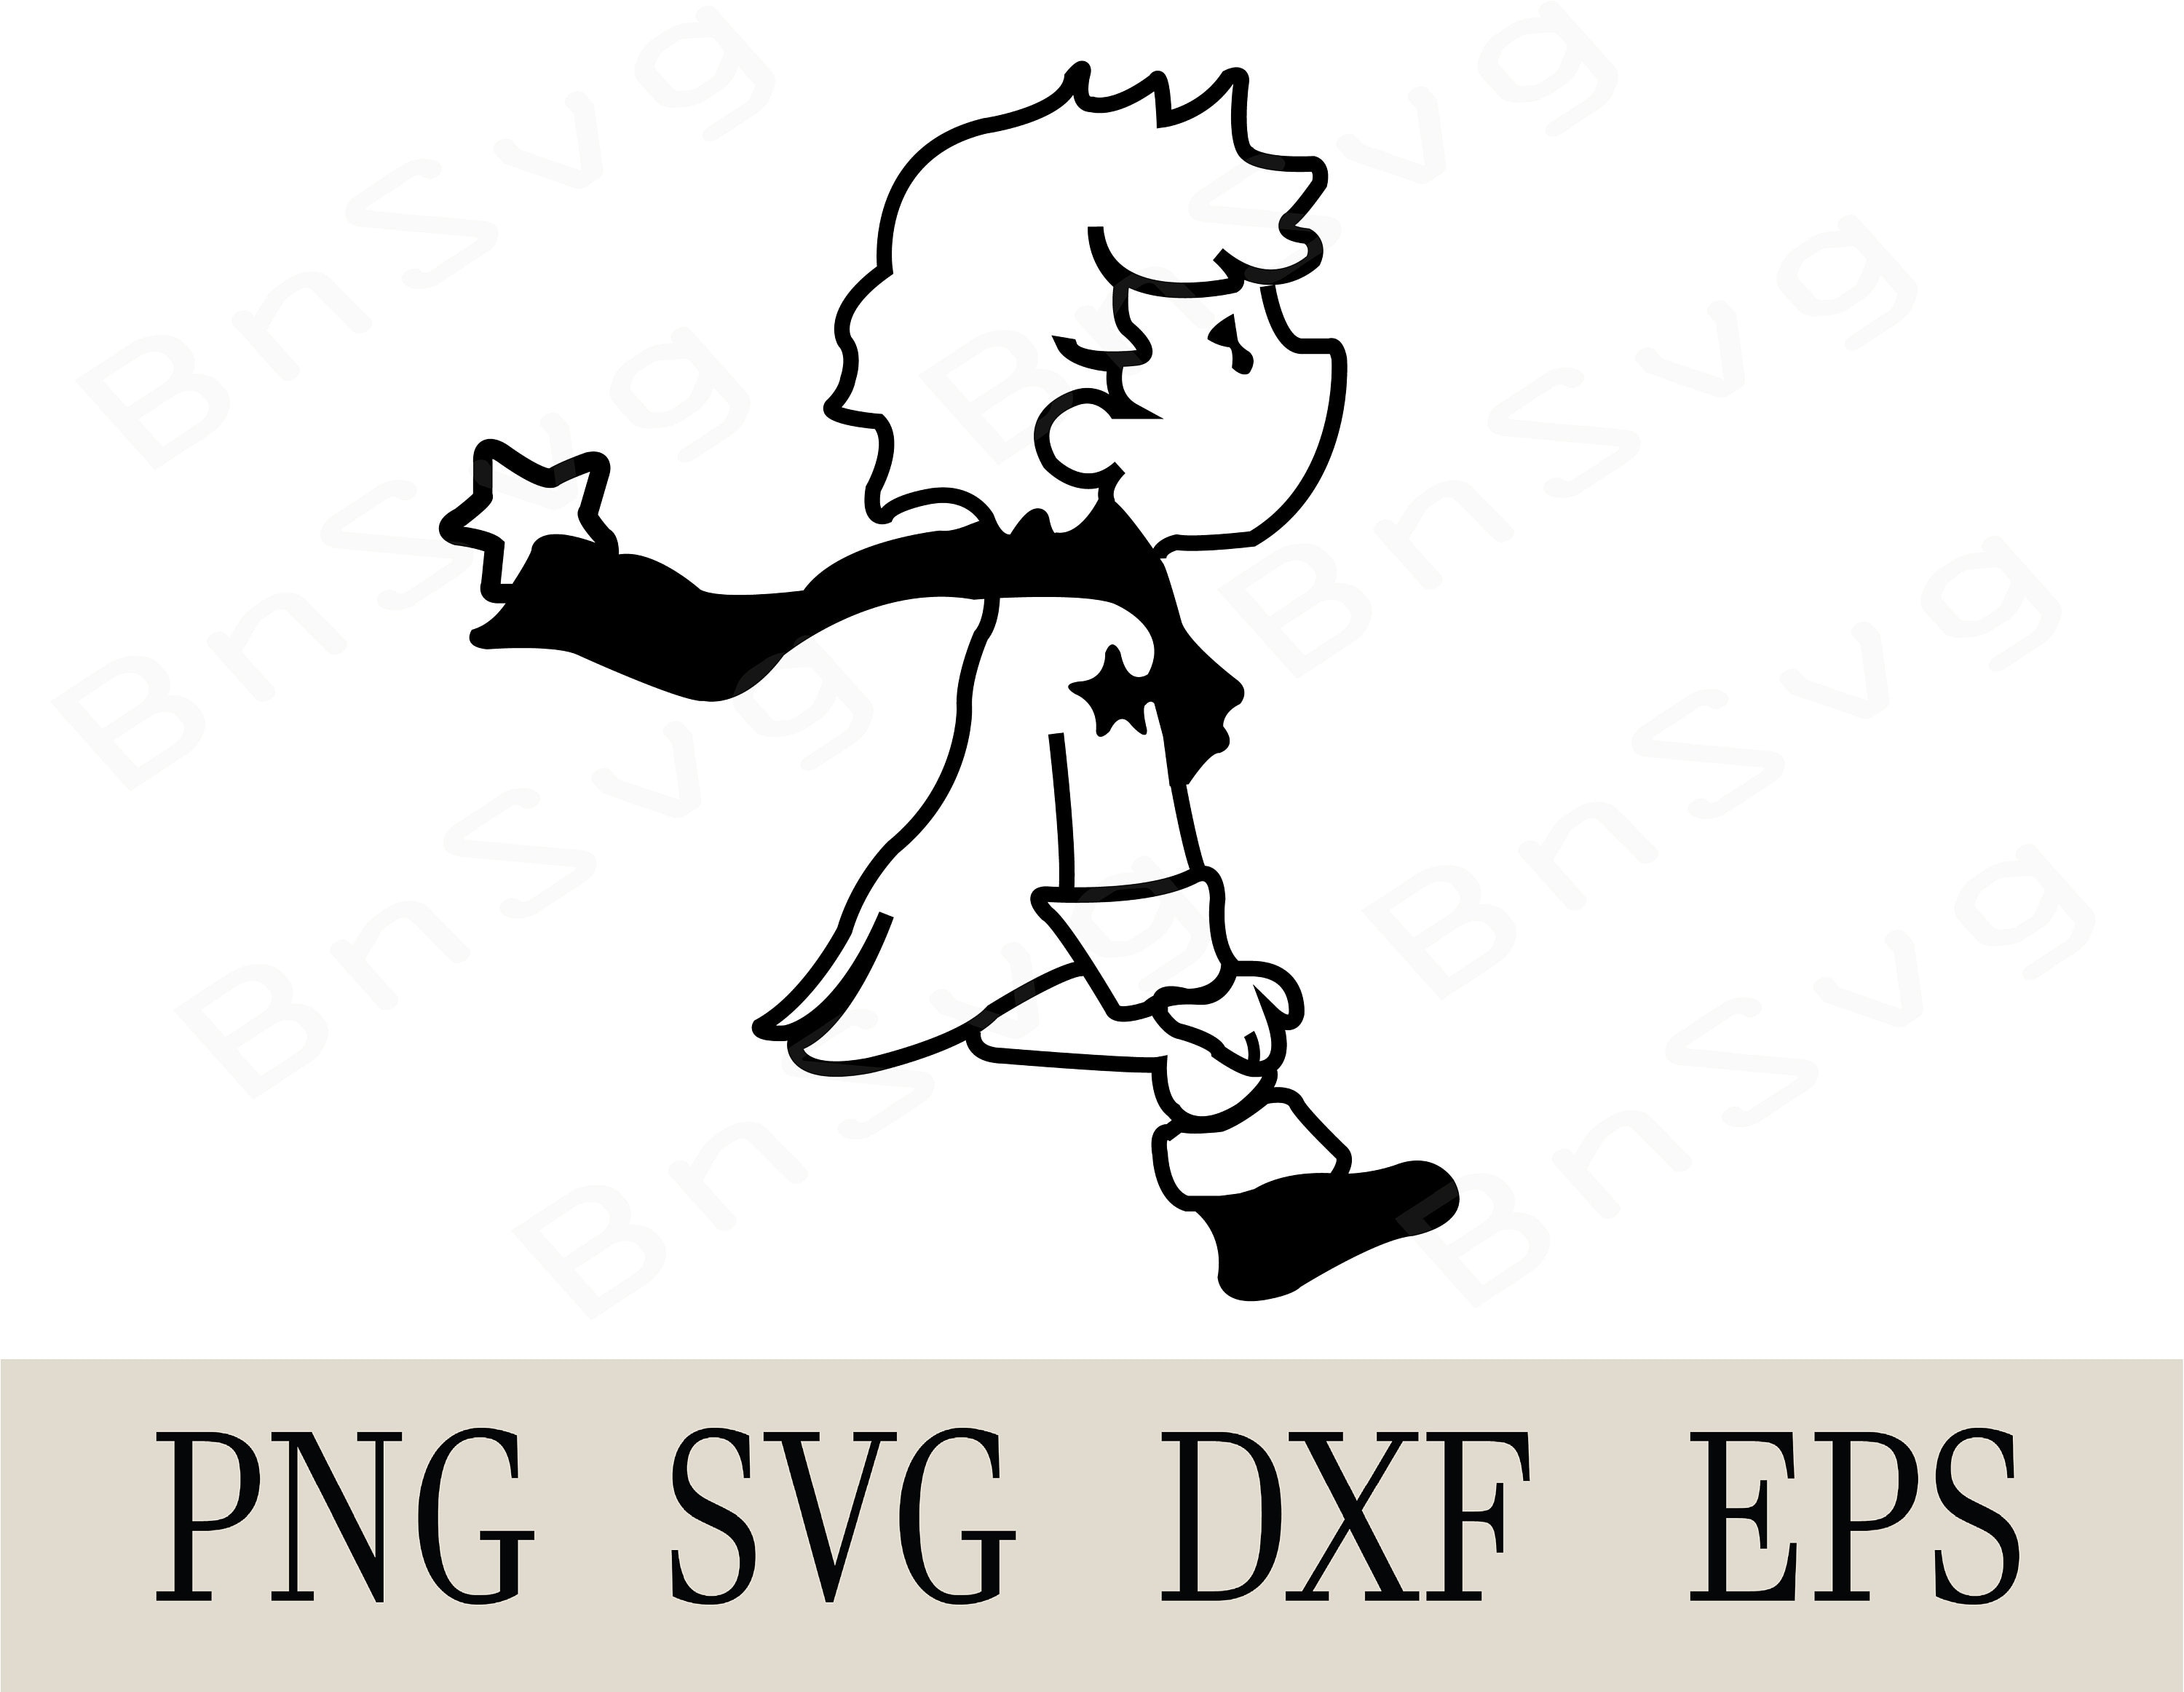 The Little Prince , The Little Prince PNG, Cutting File EPS, Cut files,  Minimalist, Cricut, Silhouette, Card Making, Clipart, Vinyl decal